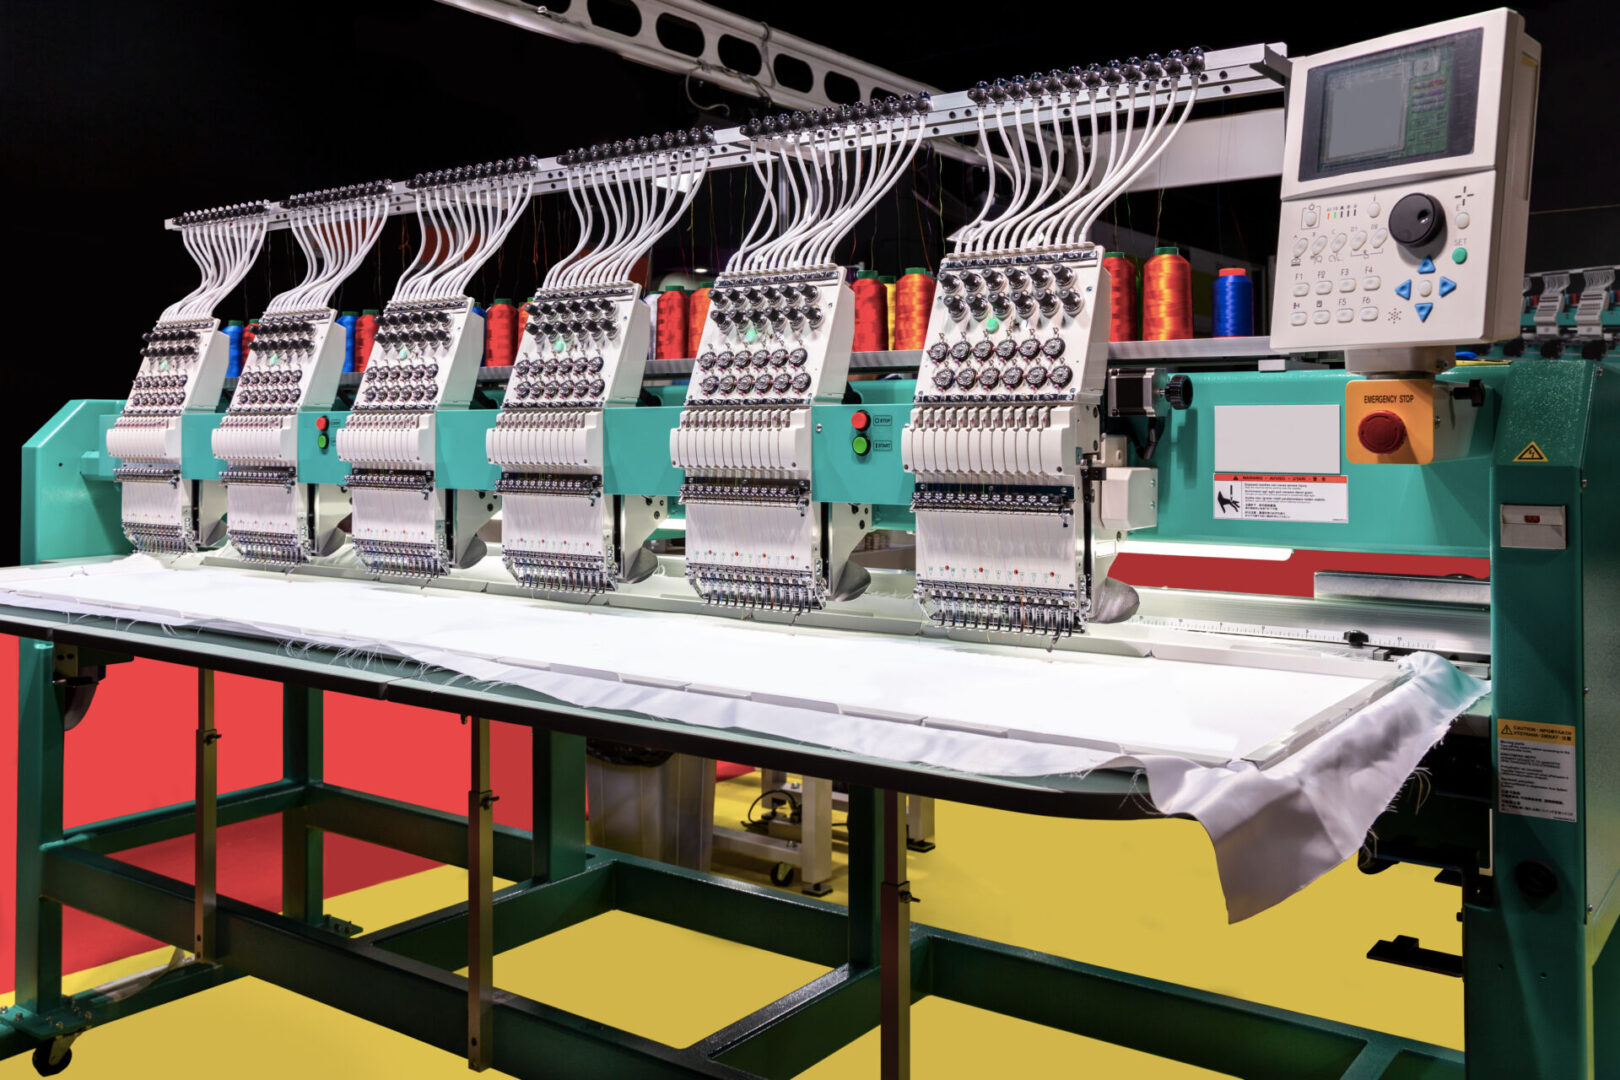 A row of embroidery machines on a table.